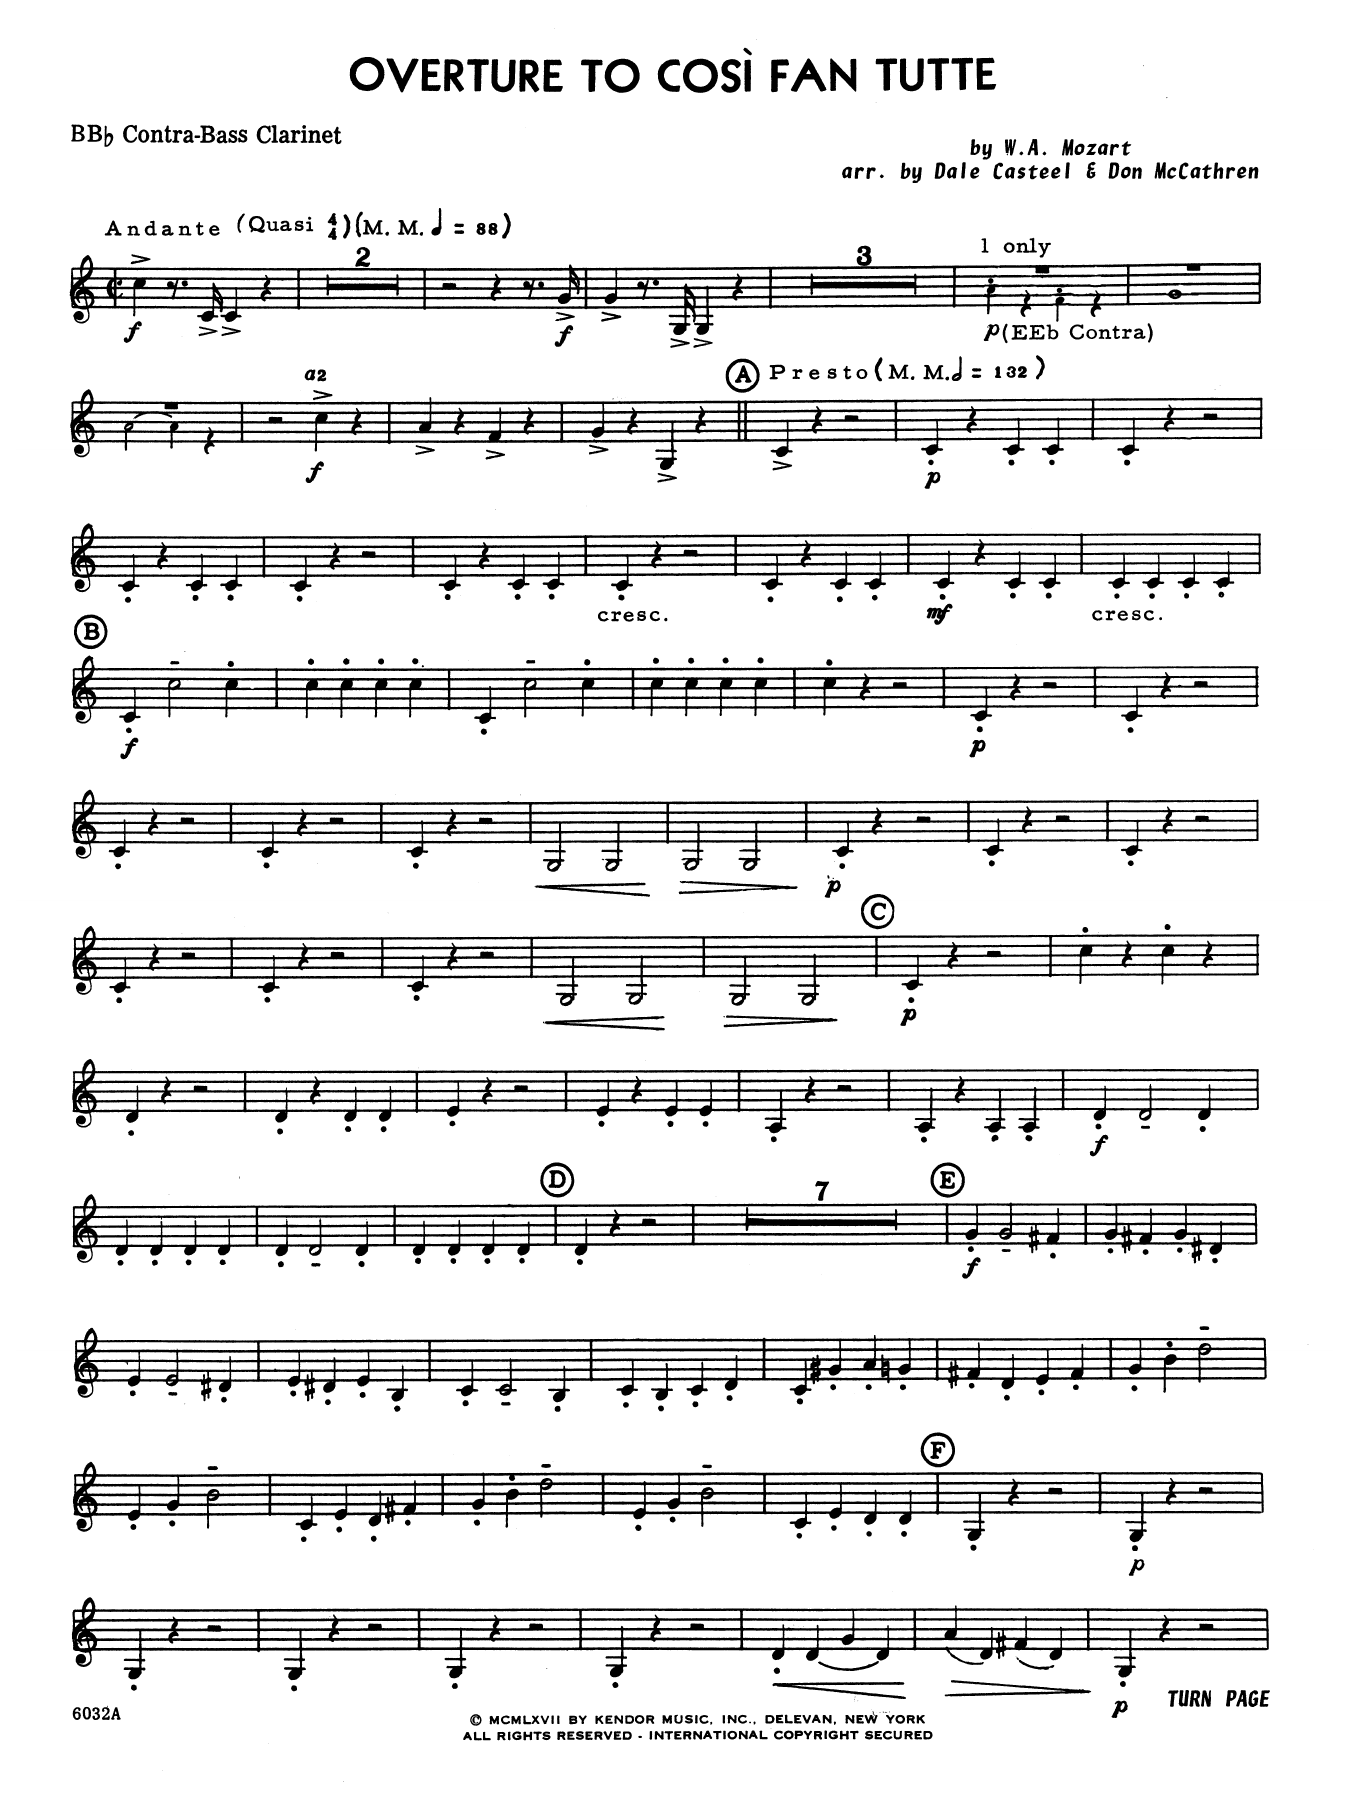 Download Dale Casteel Overture to Cosi Fan Tutte - Bb Contra Sheet Music